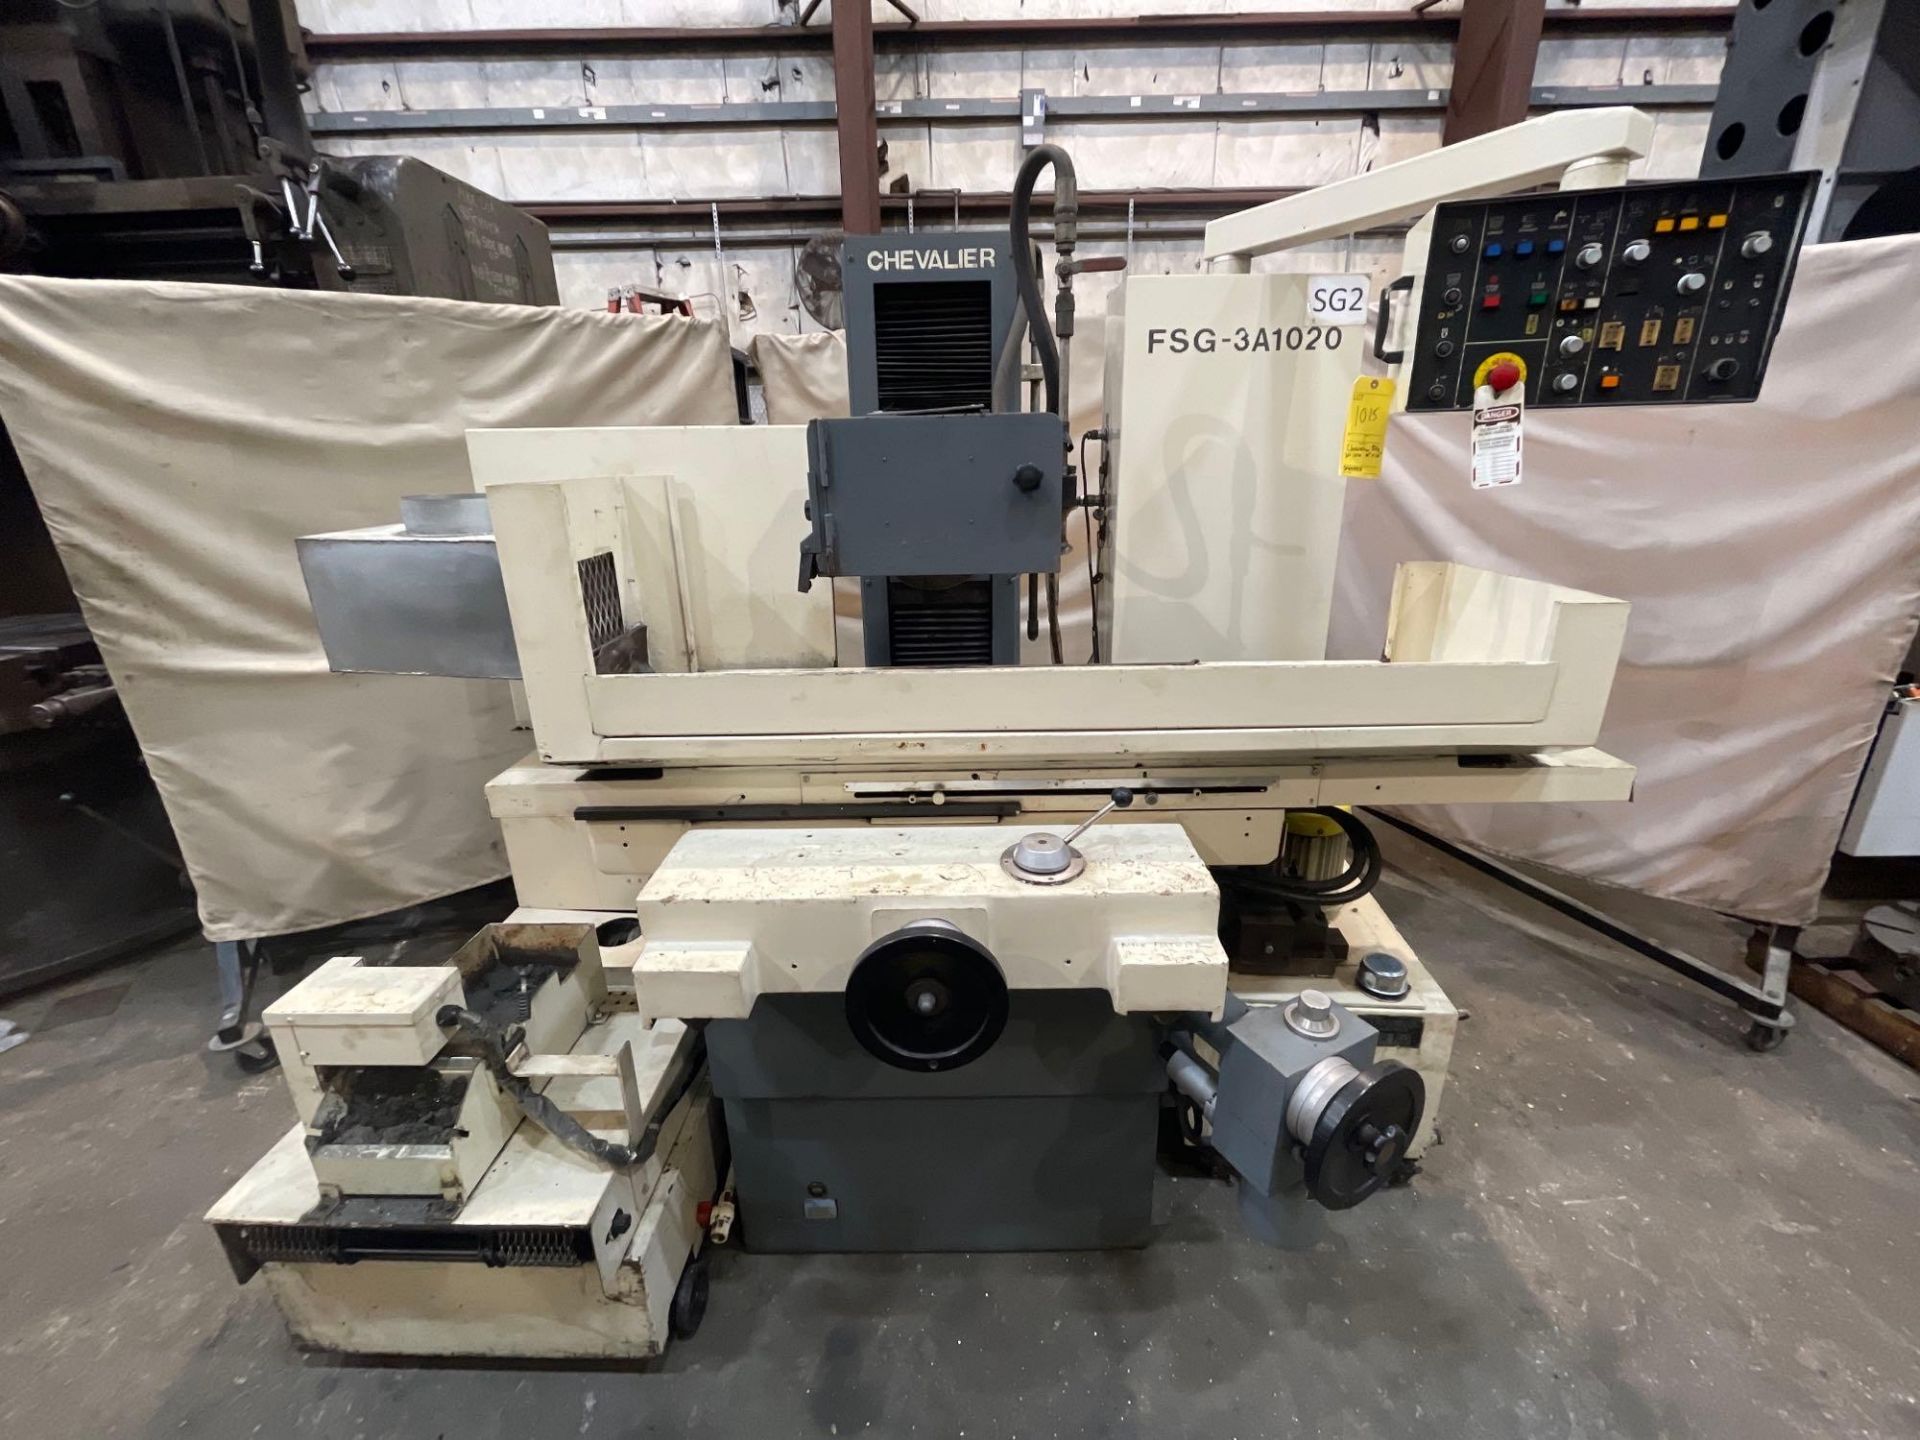 Chevalier FSG-3A1020 10" x 20" Reciprocating Table Surface Grinder - Image 3 of 14